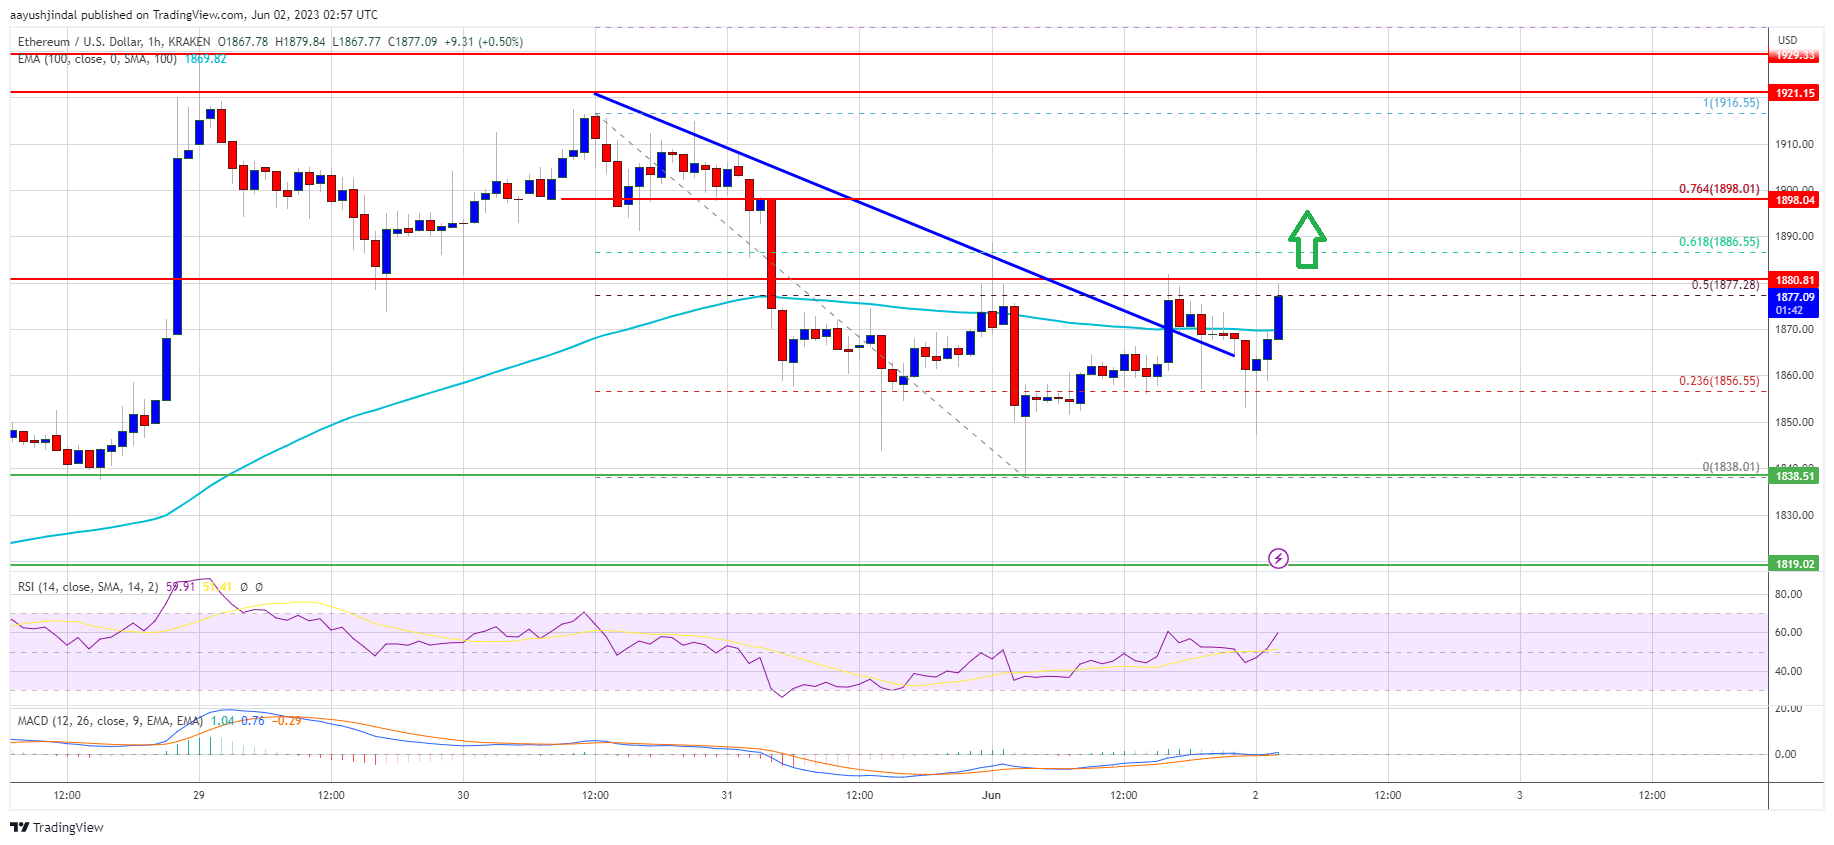 Ethereum Price Smashes Resistance, $1,900 Could Be Next